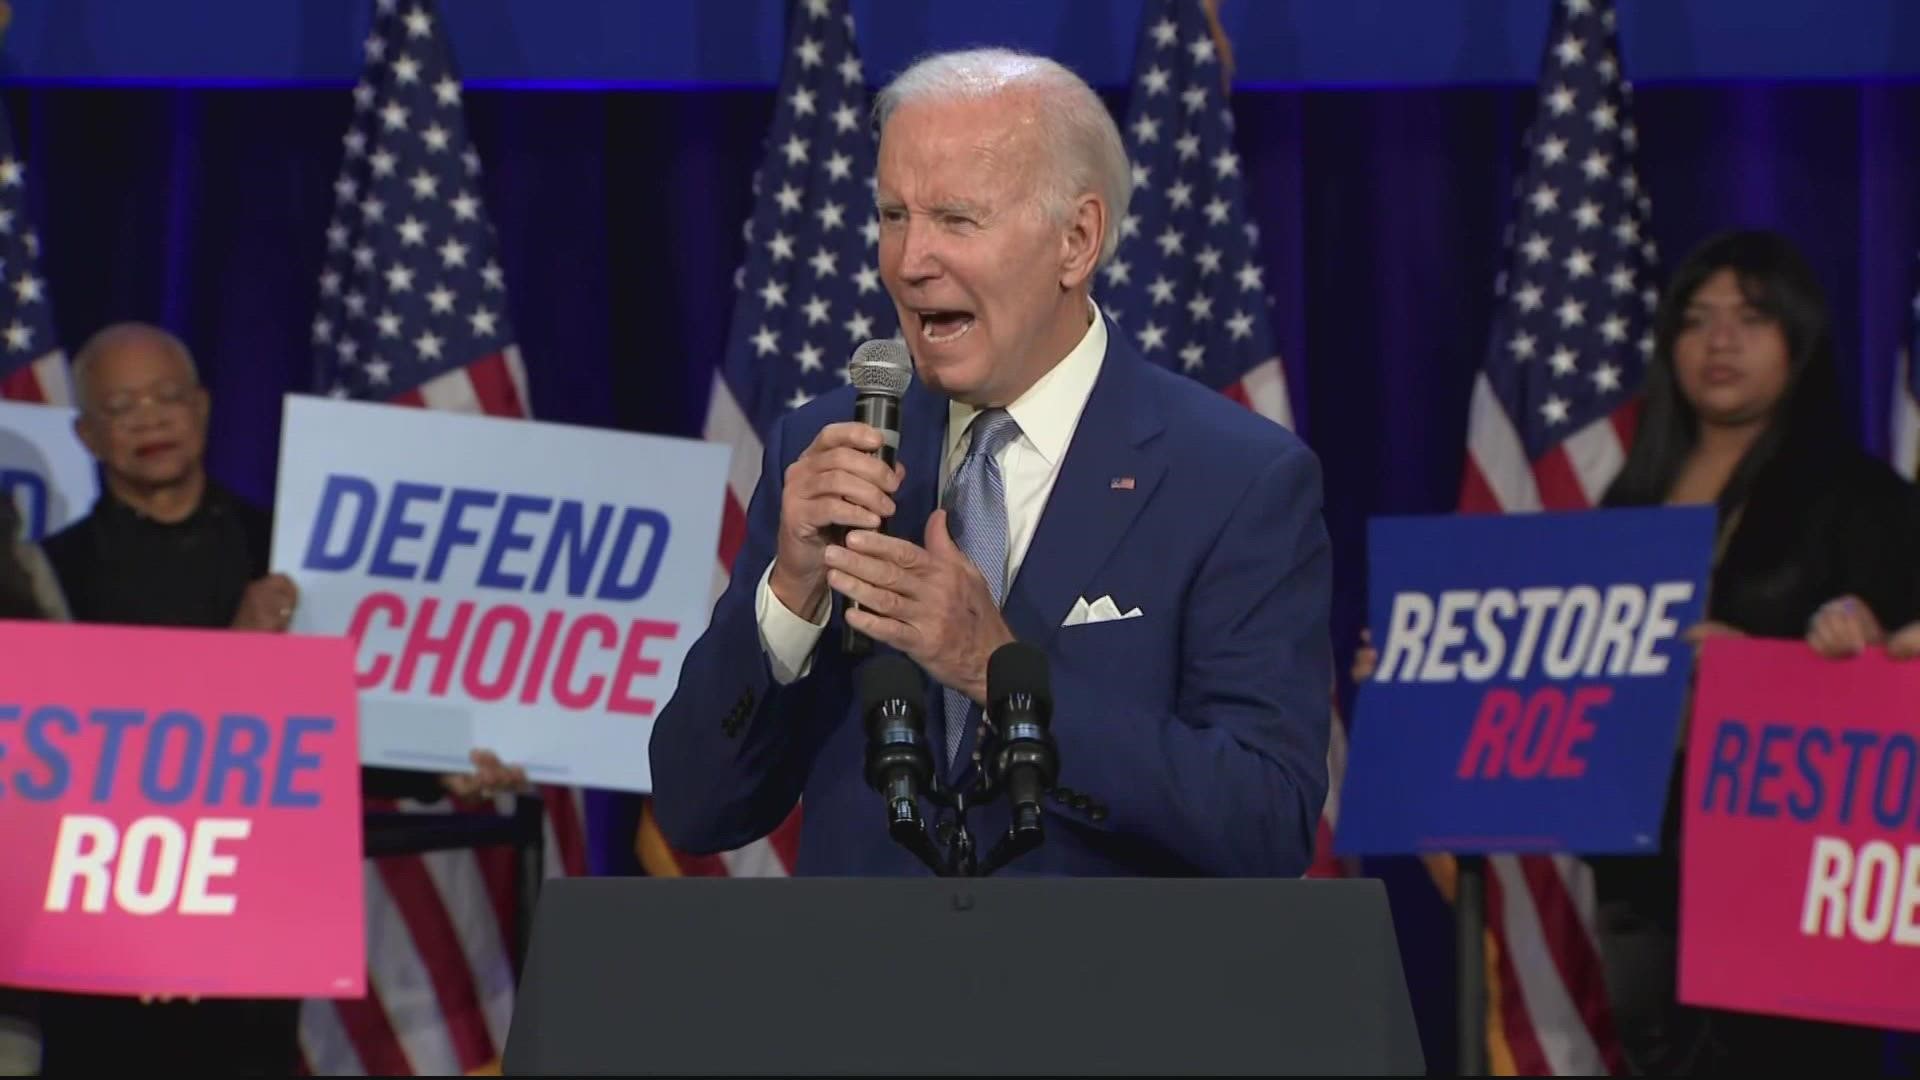 Bold promise President Biden made today-- about access to abortion care.